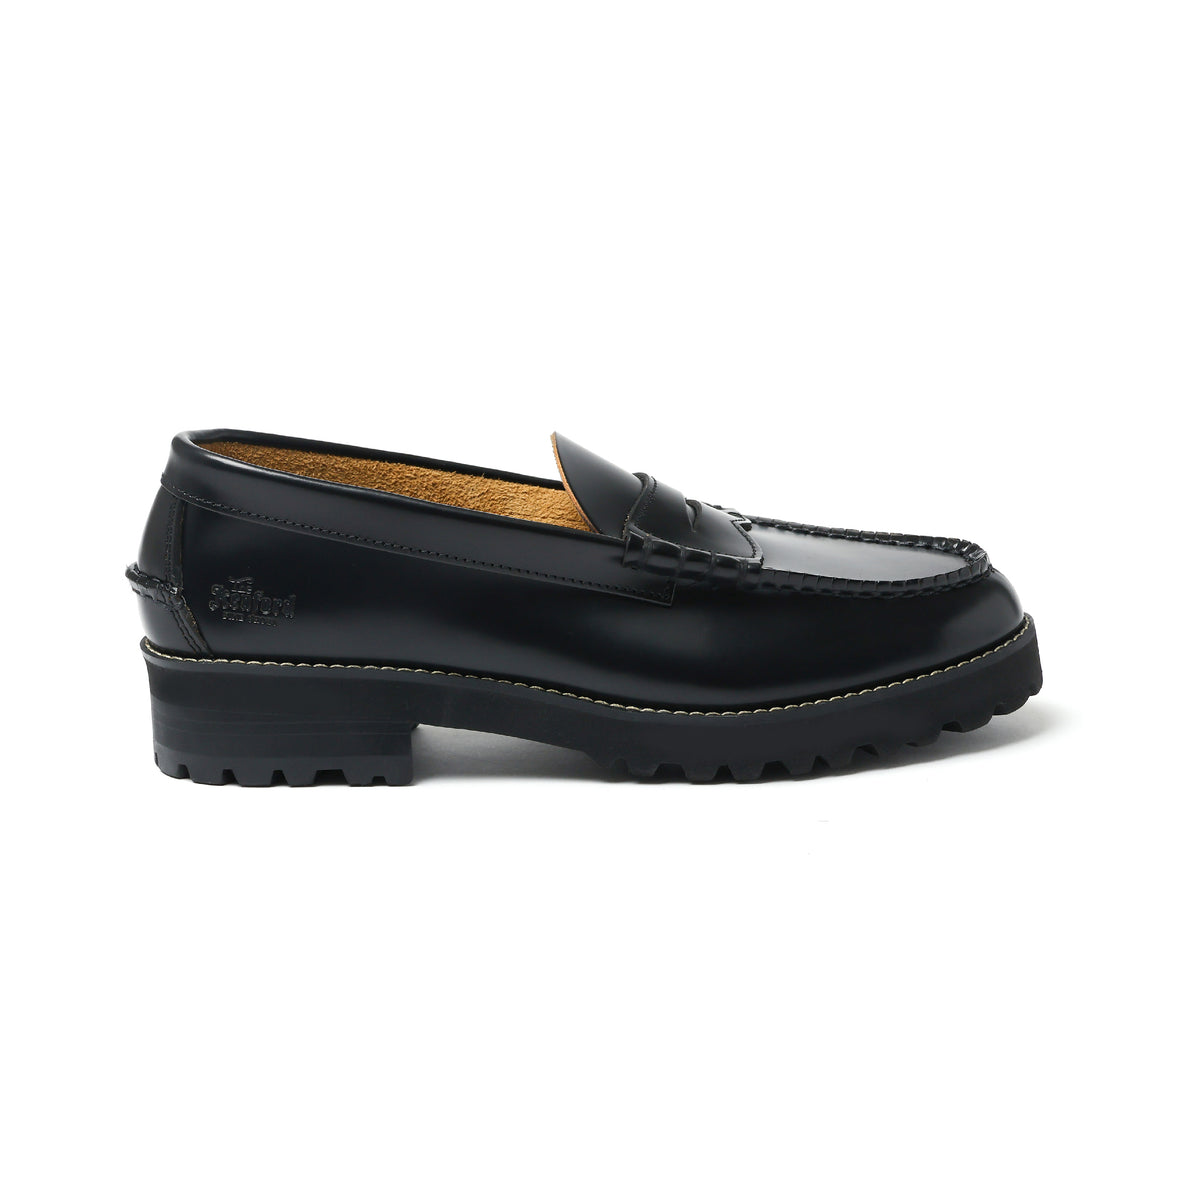 THE KENFORD FINESHOES Official Mail Order WOMENS TANK SOLE LOAFERS 